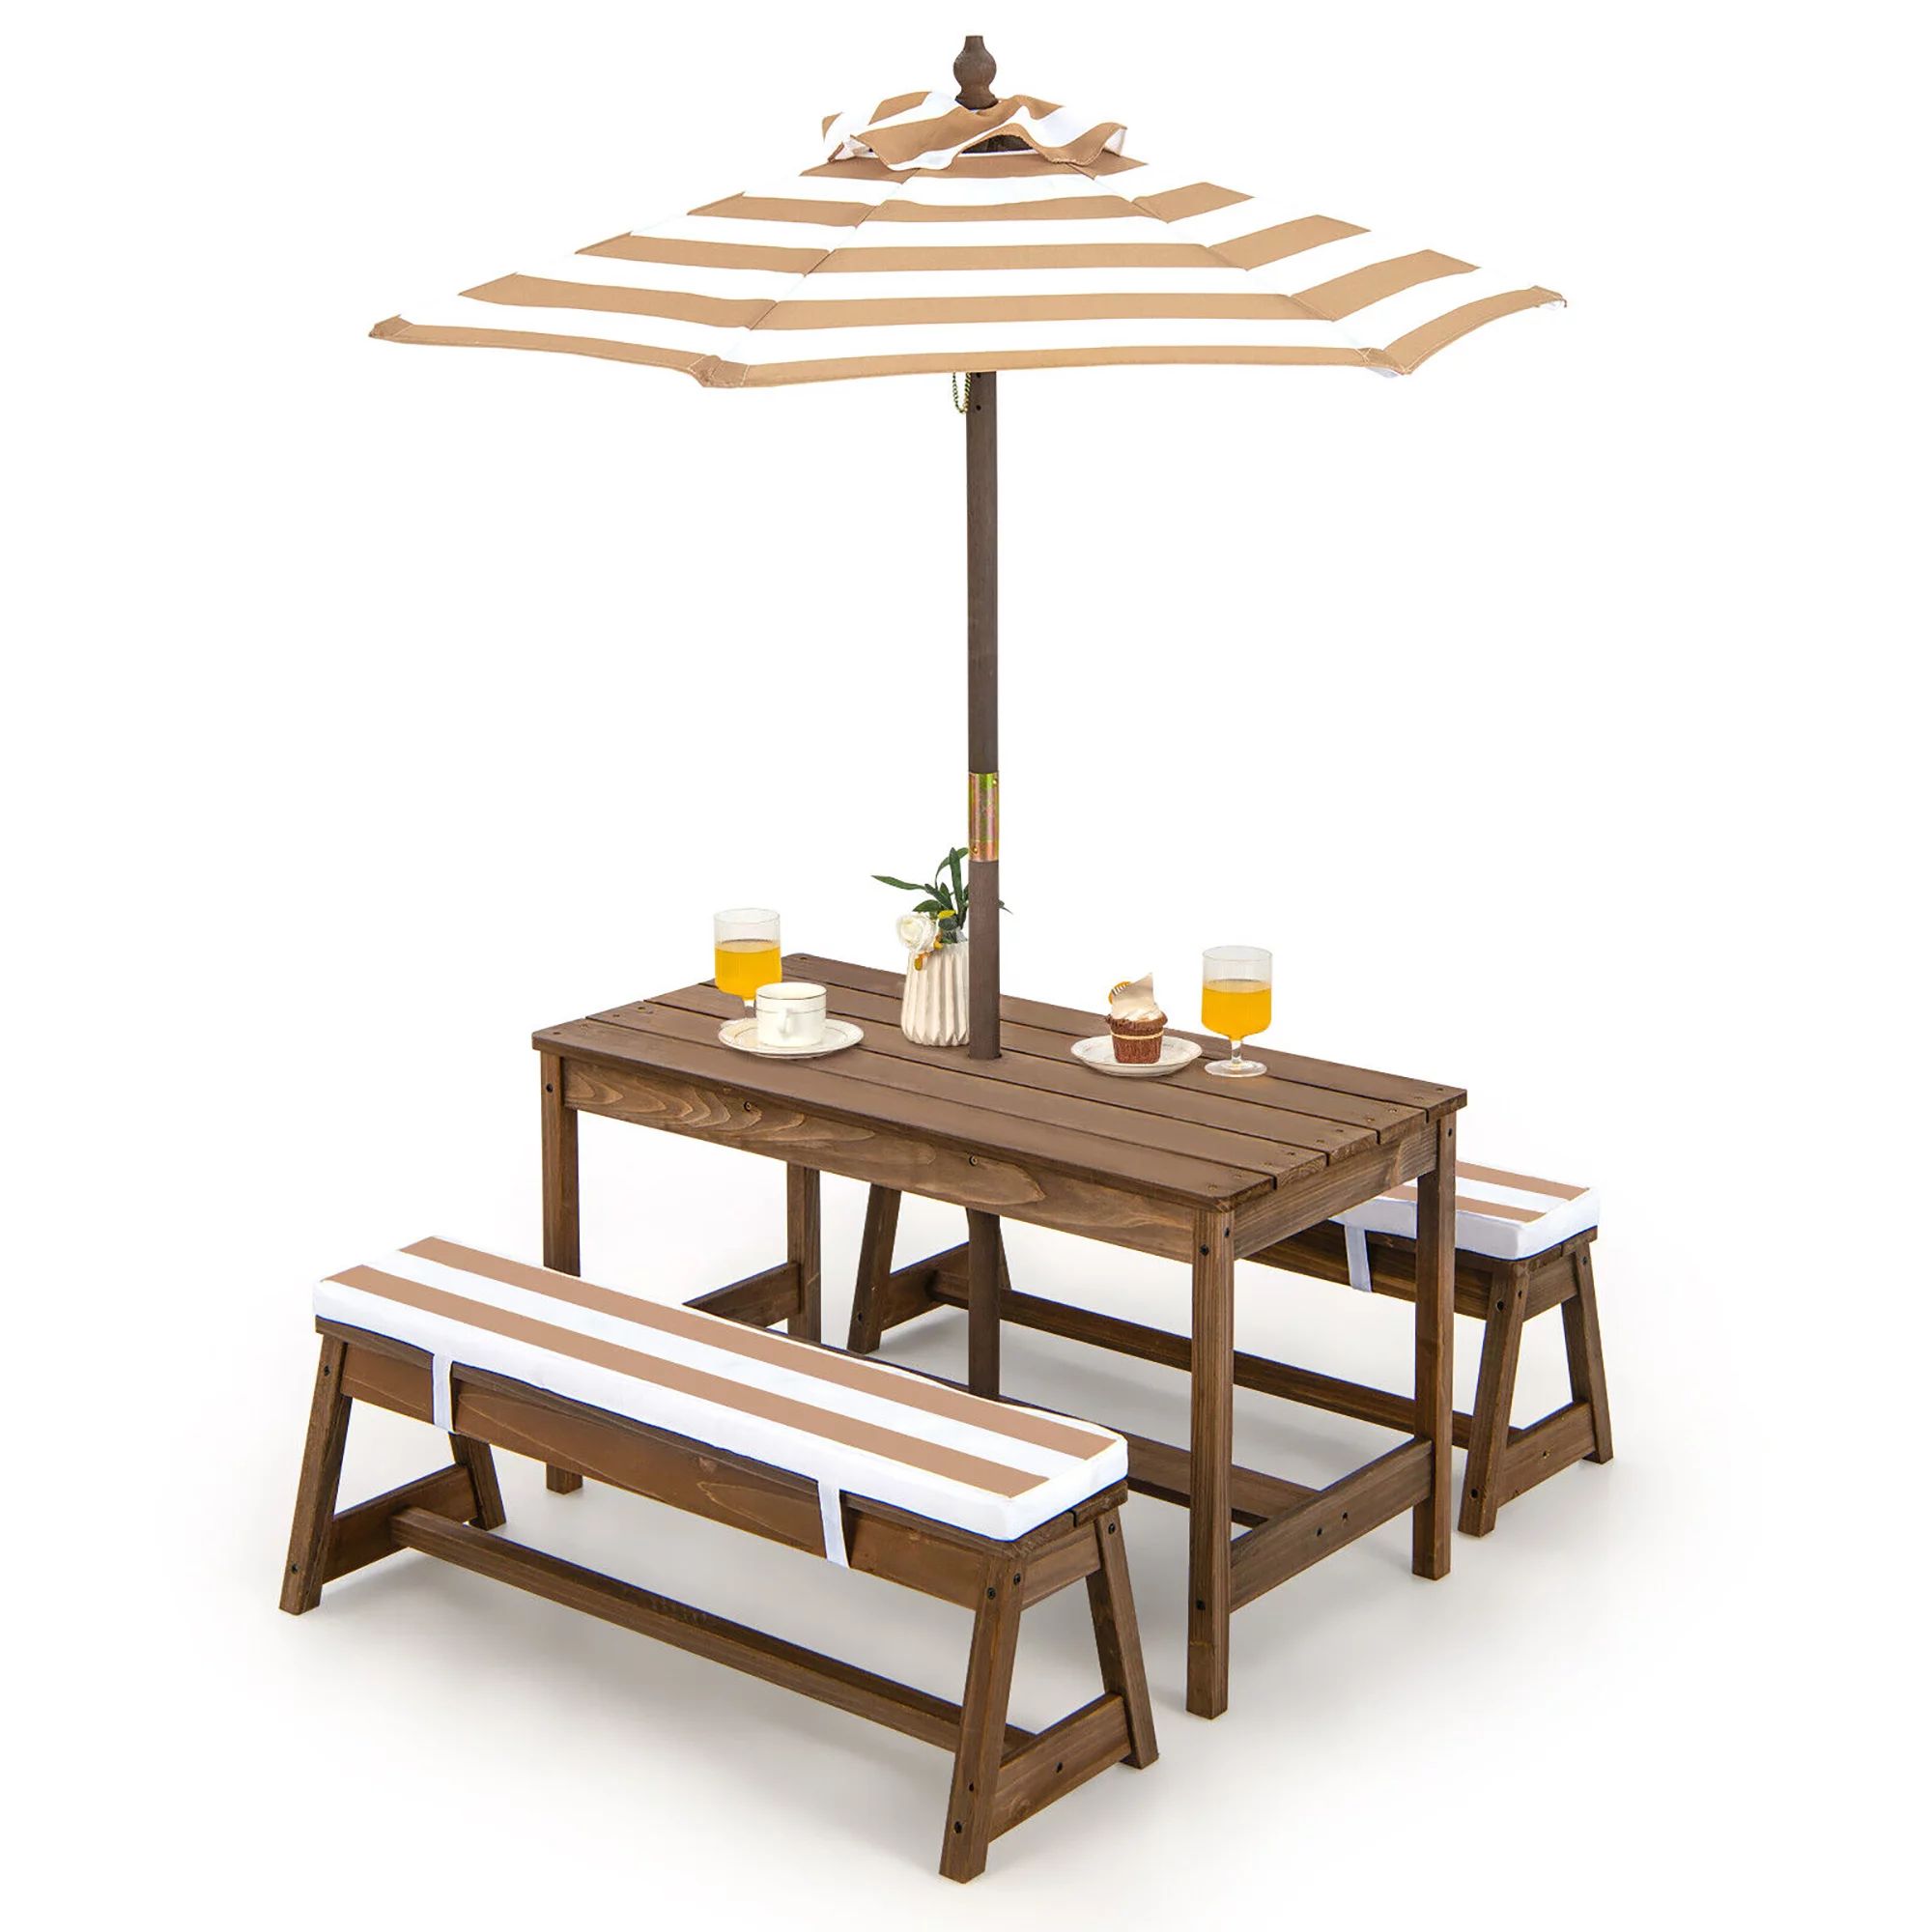 Gymax Kids Wood Picnic Table and Bench Set w/ Cushions Umbrella for Indoor Outdoor Brown | Walmart (US)